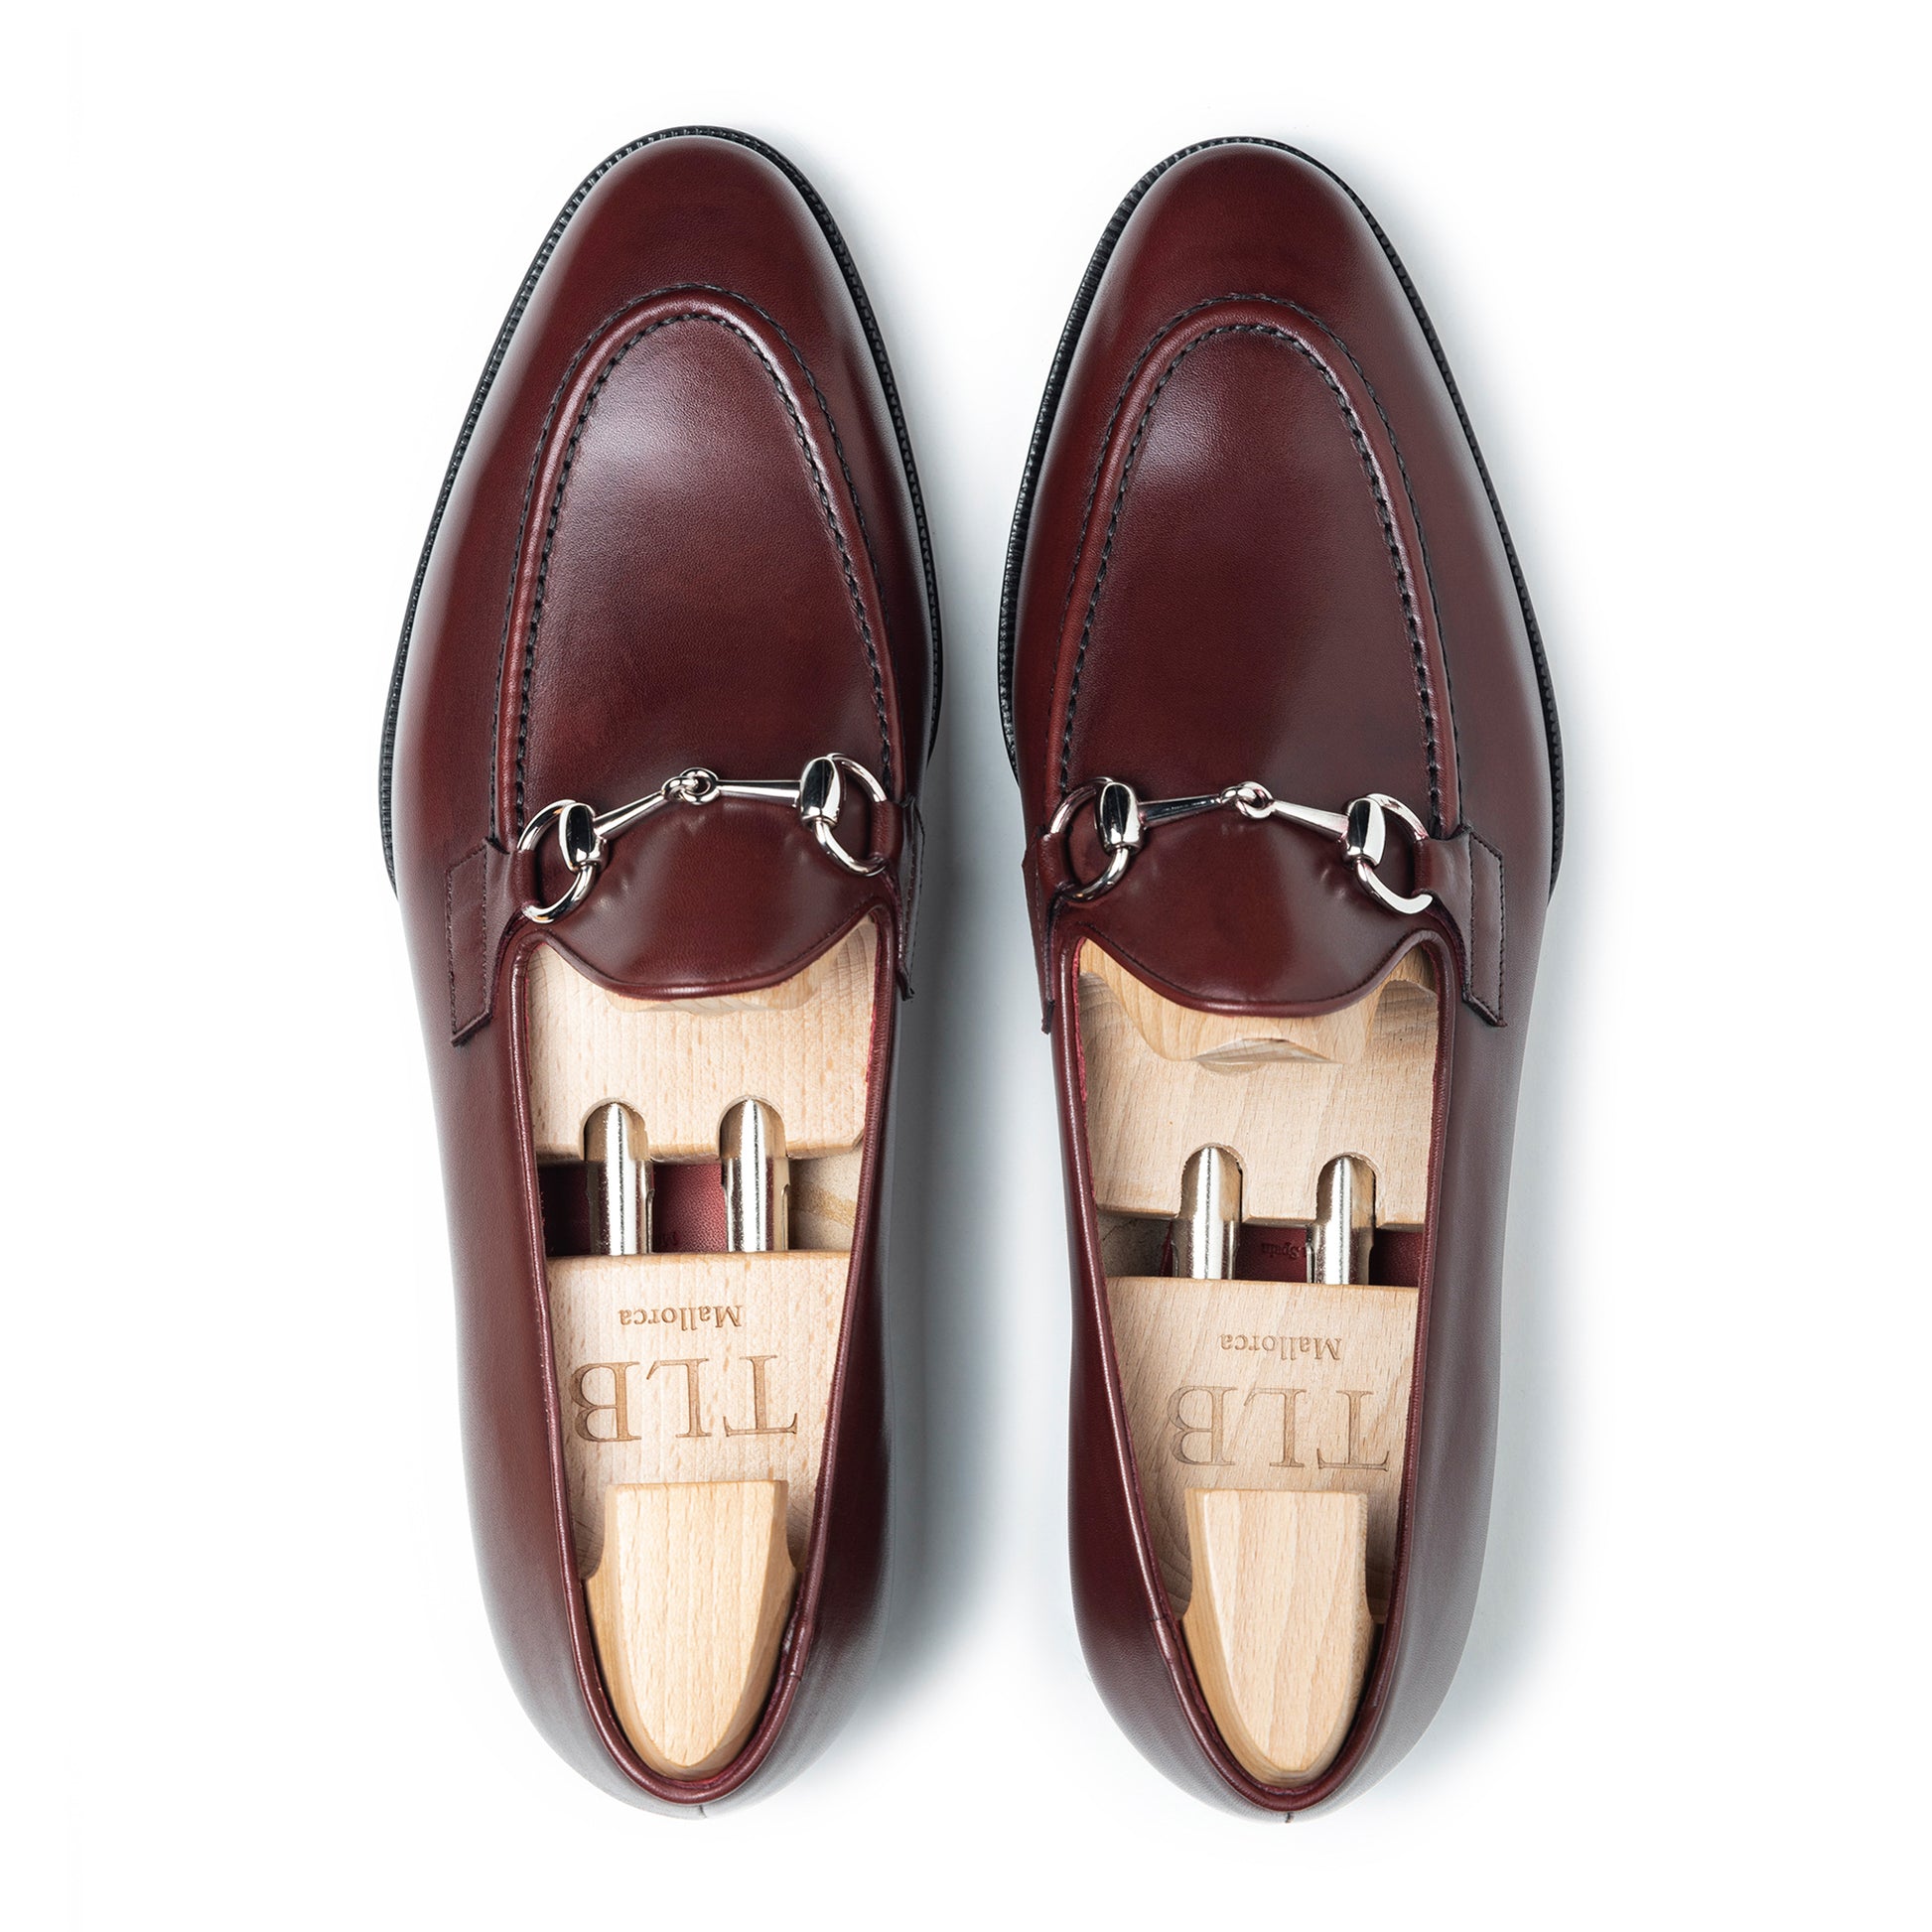 TLB Mallorca | Men's Leather loafers | Men's leather shoes | vegano burgundy 283